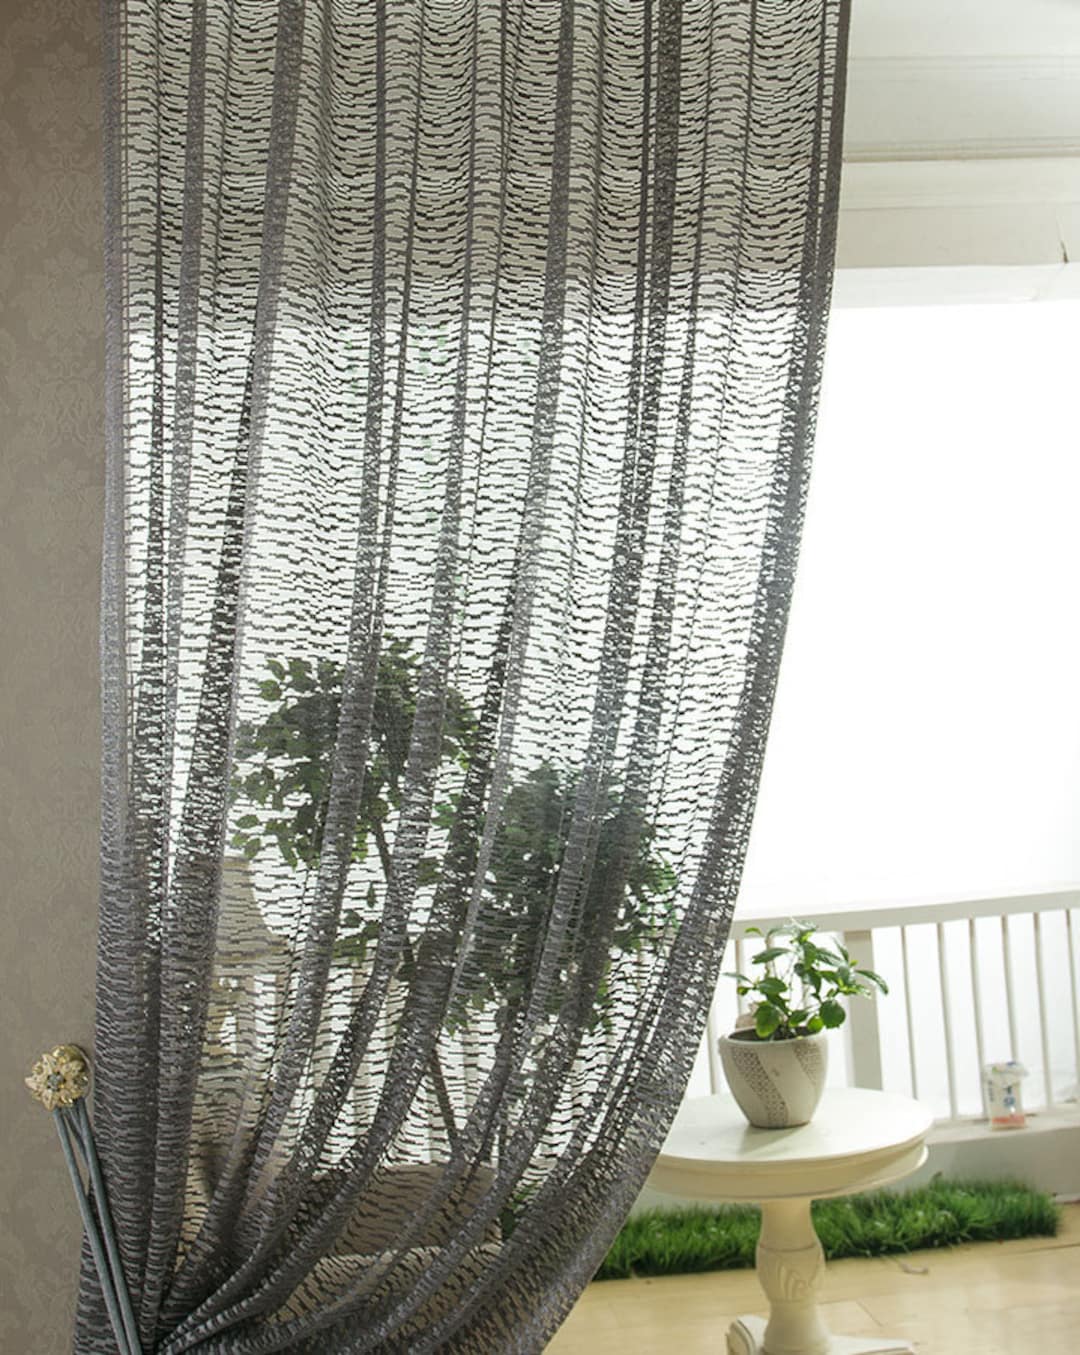 Taupe Jacquard Net Sheer Curtain Voile Panel. One Custom Made Panel. Choose  Width and Length. Made to Order. Jacquard Leaf Pattern. 